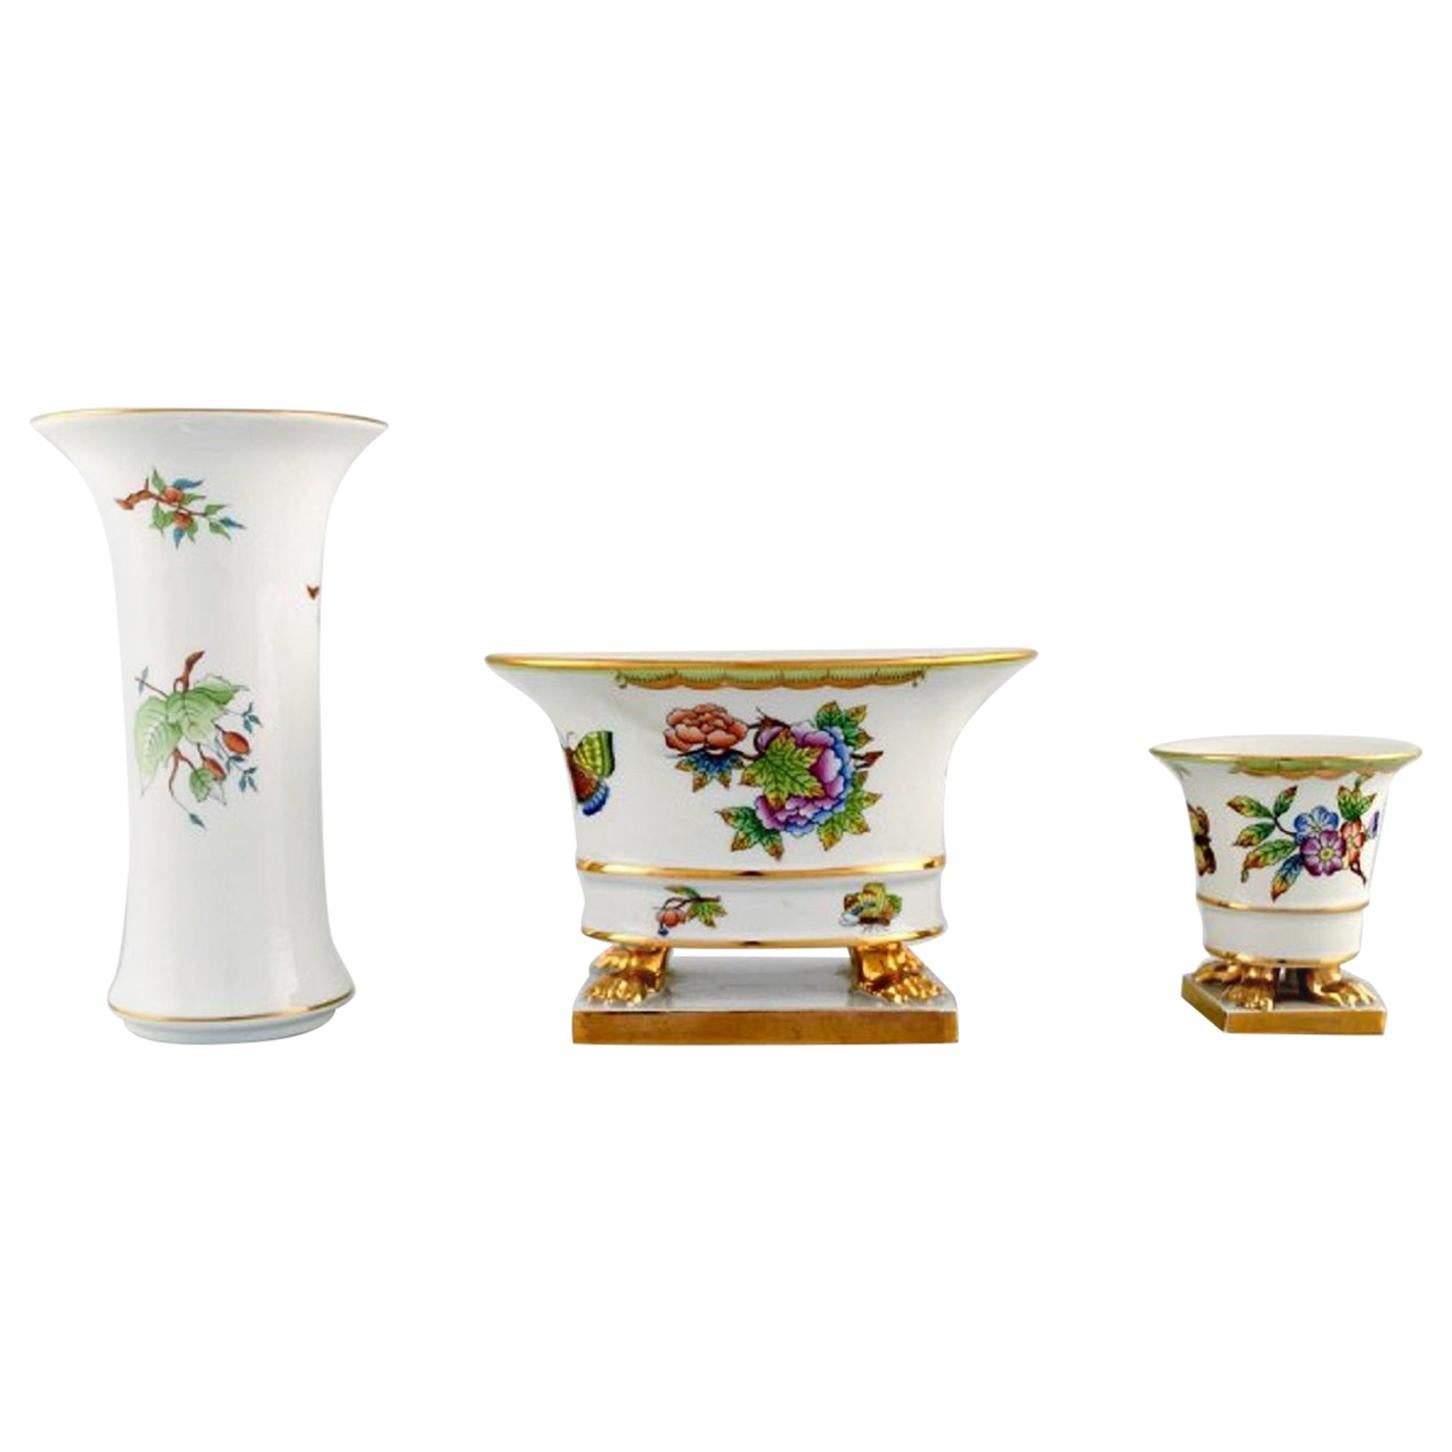 Three Herend Vases in Hand Painted Porcelain with Flowers and Gold Decoration